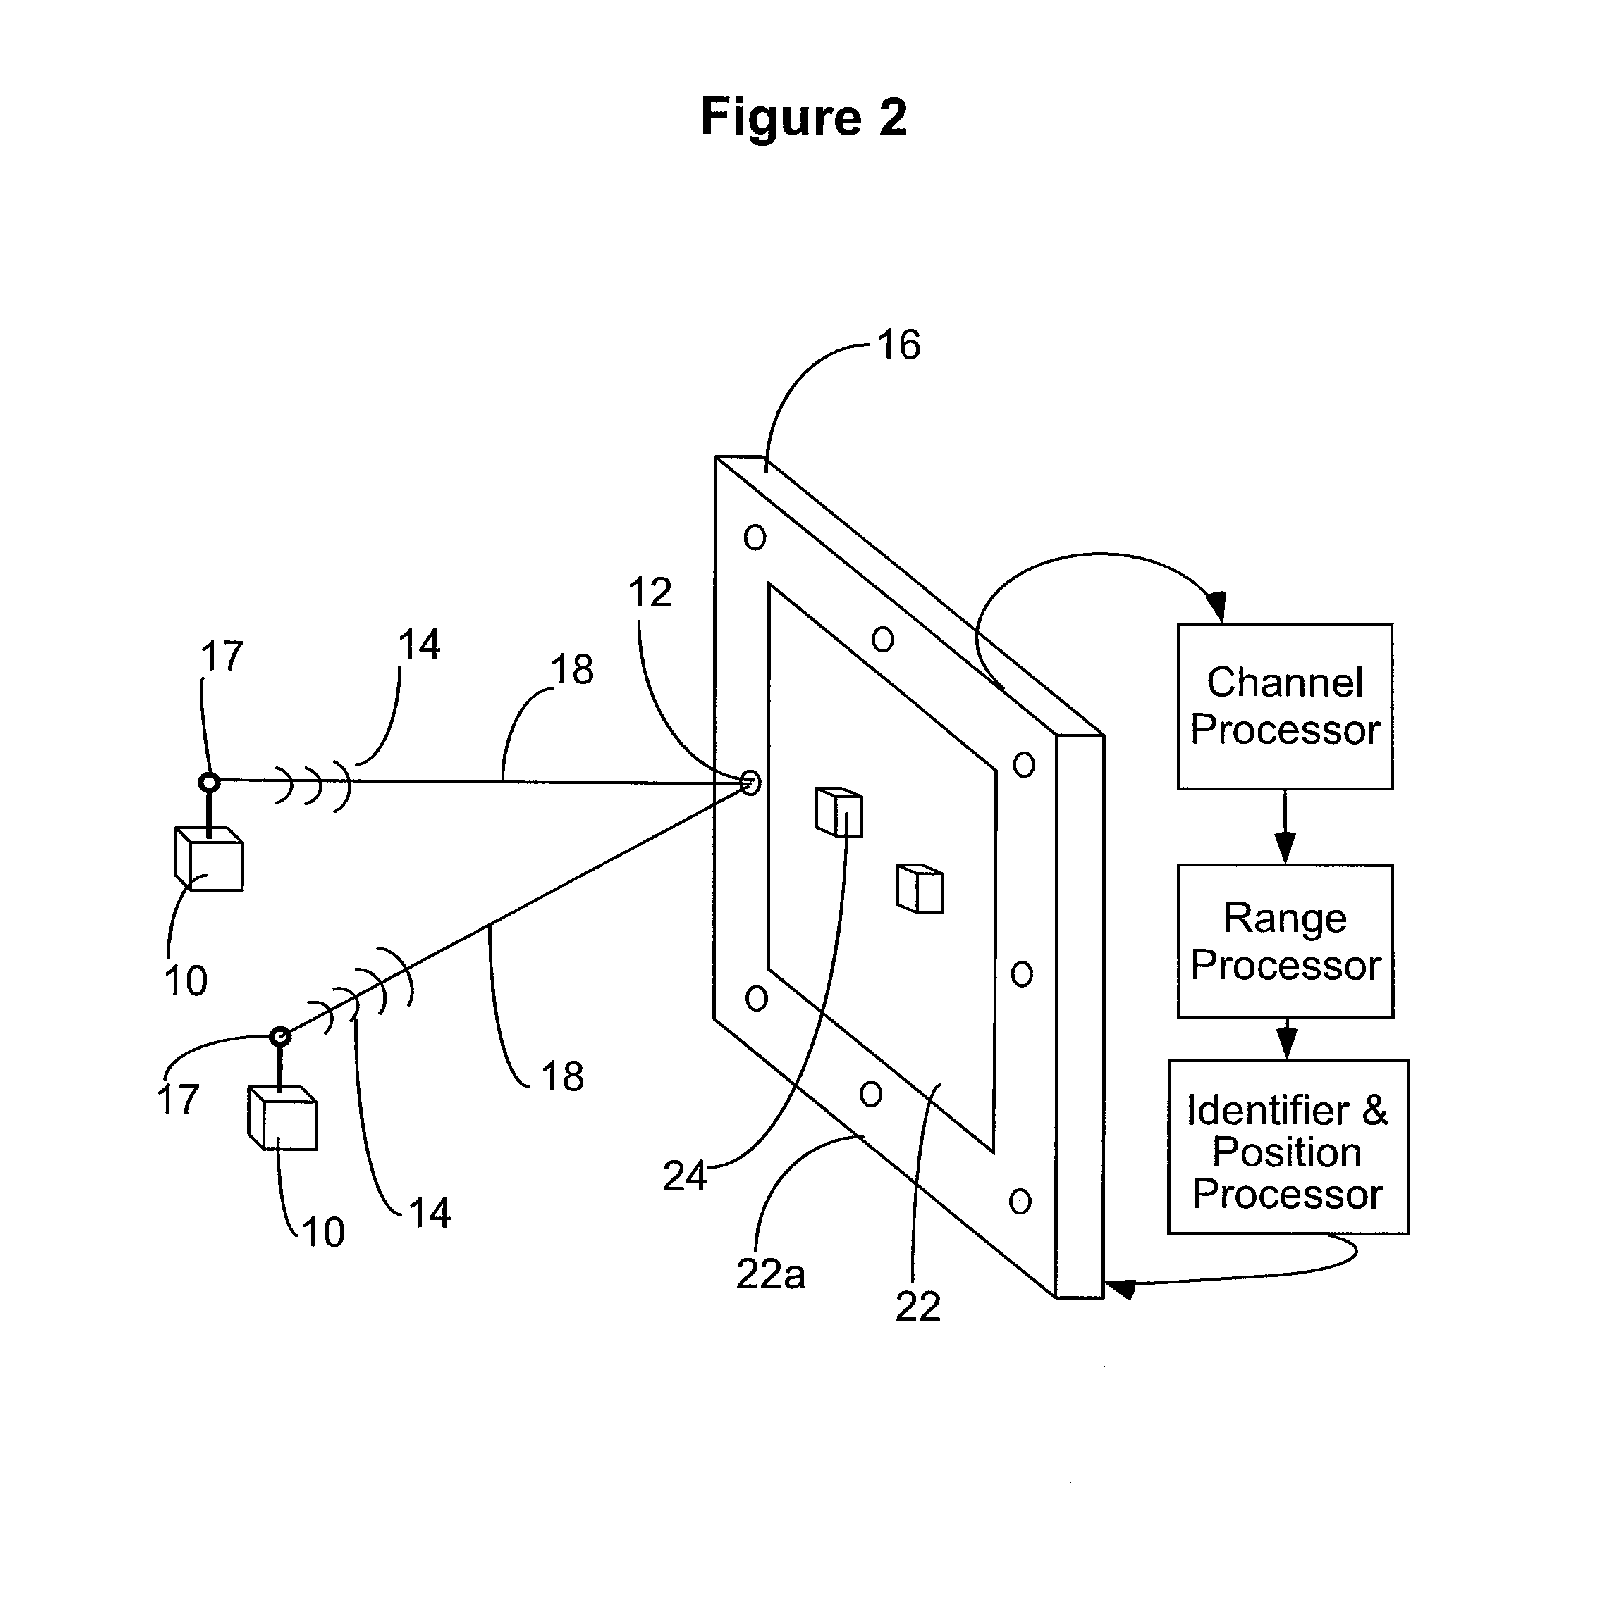 Method and apparatus for ranging finding, orienting, and/or positioning of single and/or multiple devices